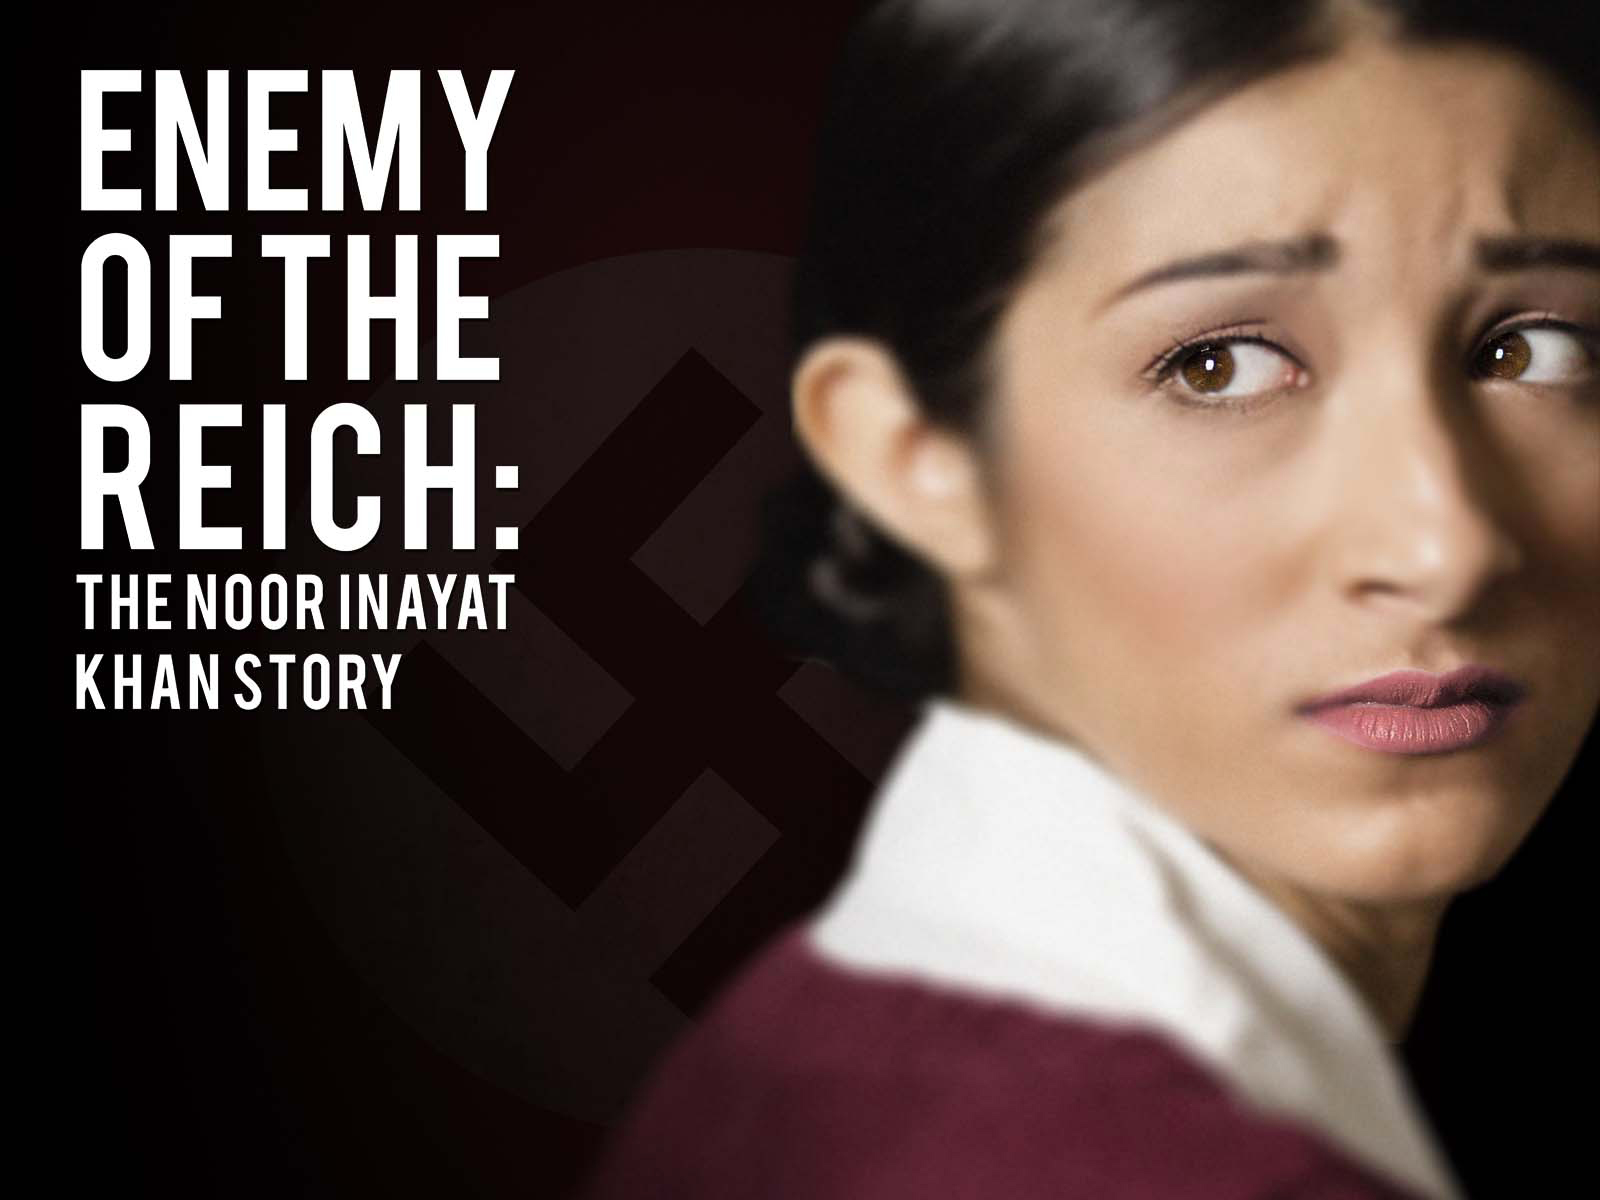 upf film thumbnail enemy of the reich noor inayat khan story